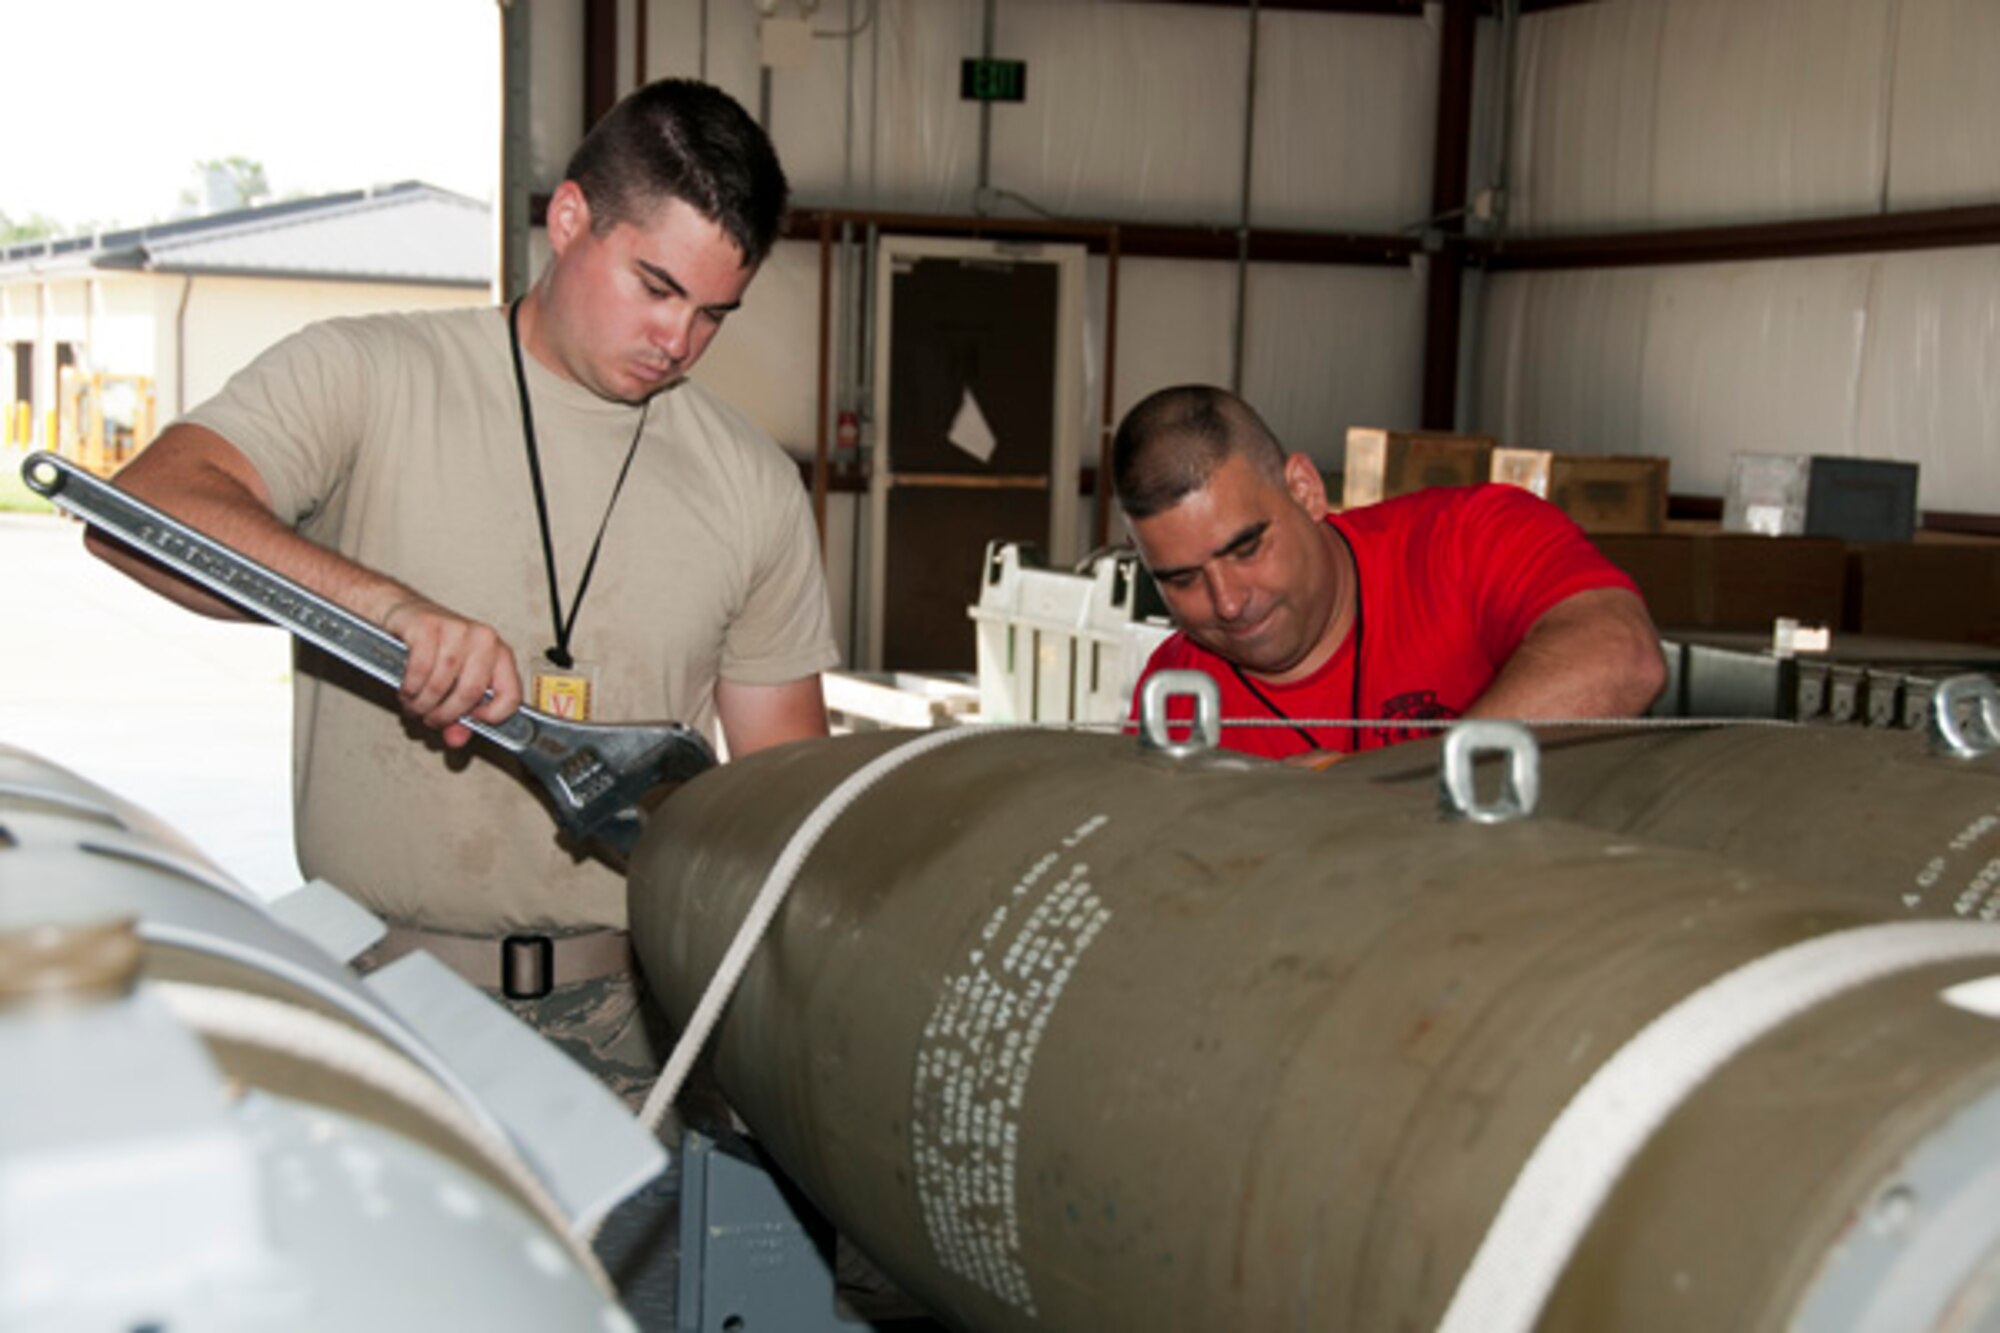 Virginia Air National Guard Tech. Sgt. Kenneth Stanley (right), 192nd Maintenance Squadron ordnance maintenance mechanic, and U.S. Air Force Airman 1st Class Randal Trosky, 1st Maintenance Squadron ordinance maintenance mechanic, train together by building eight Mark 83 inert bombs during an exercise on July 10, 2016 at Joint Base Langley-Eustis, Virginia. This exercise will support the commemoration of Maj. Gen. Billy Mitchell’s bombing of the German battleship, SMS Ostfriesland, off of the Virginia Capes, July 1921. Billy Mitchell, who is often referred to as the Father of the Air Force, sunk the SMS Ostfriesland to prove a case for the power of an independent air service. (U.S. Air National Guard photo by Master Sgt. Carlos J. Claudio)